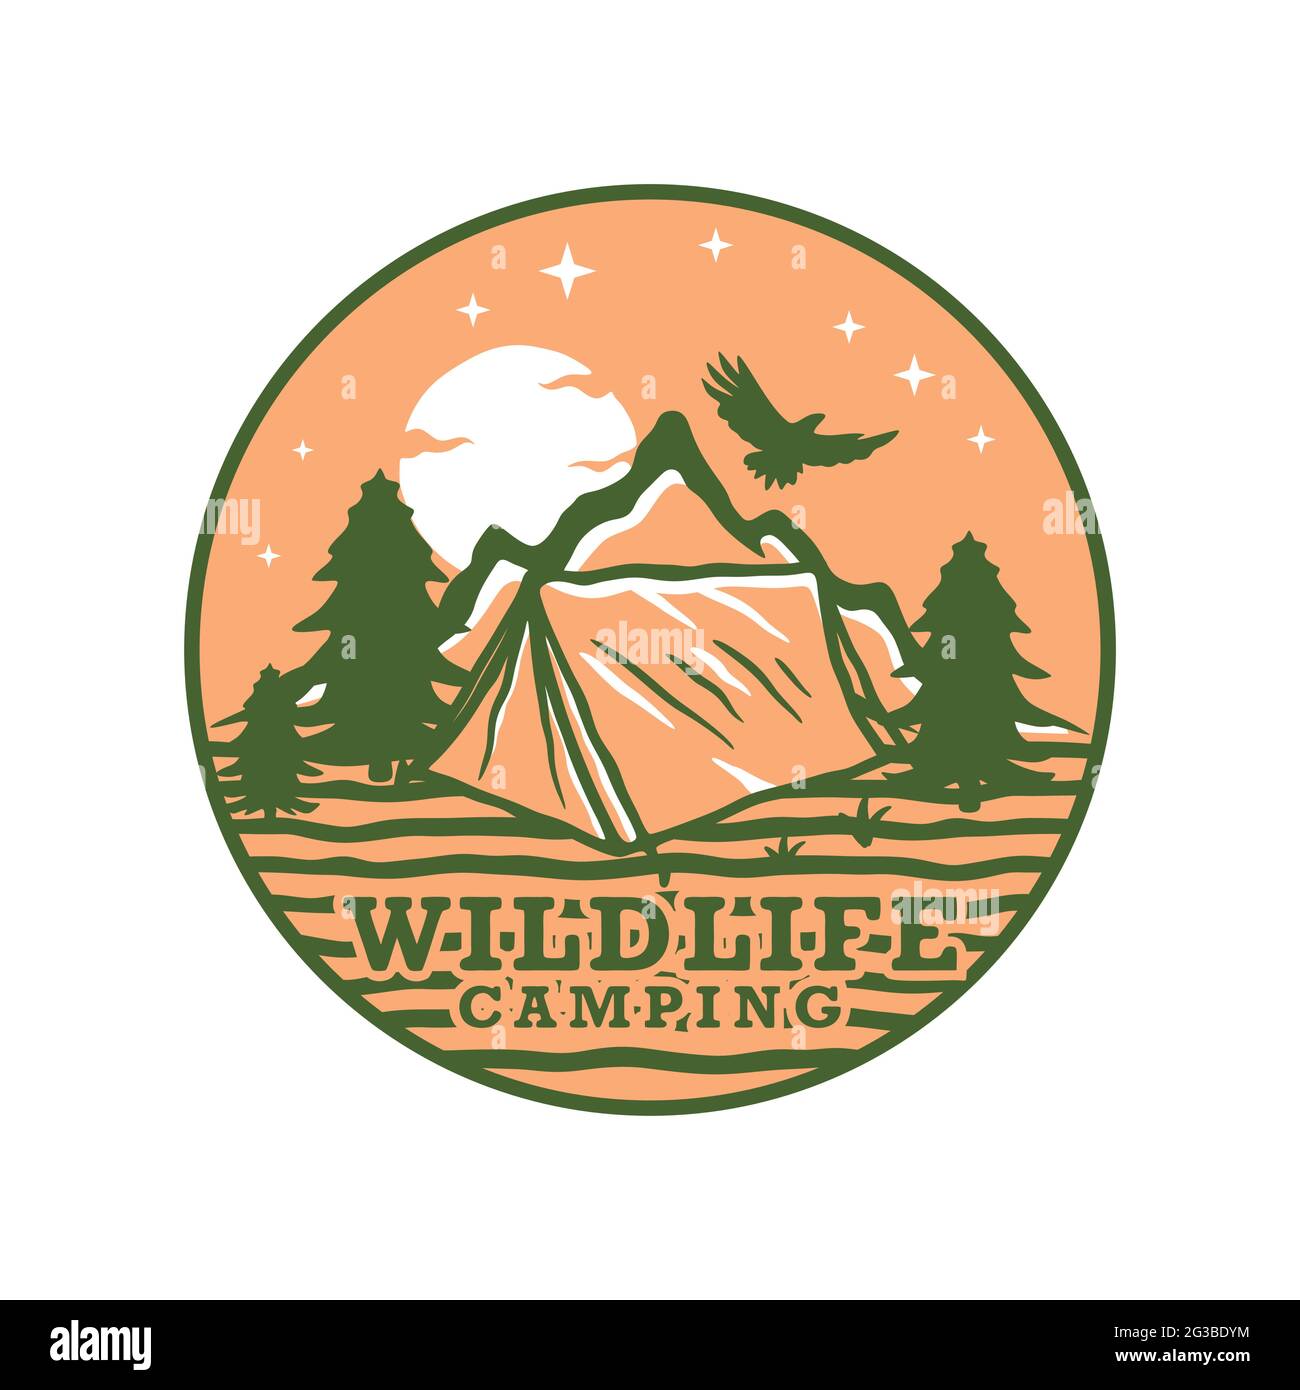 Mountain illustration, wild life camping outdoor adventure . Vector graphic for t shirt, logo, emblem and other uses Stock Vector